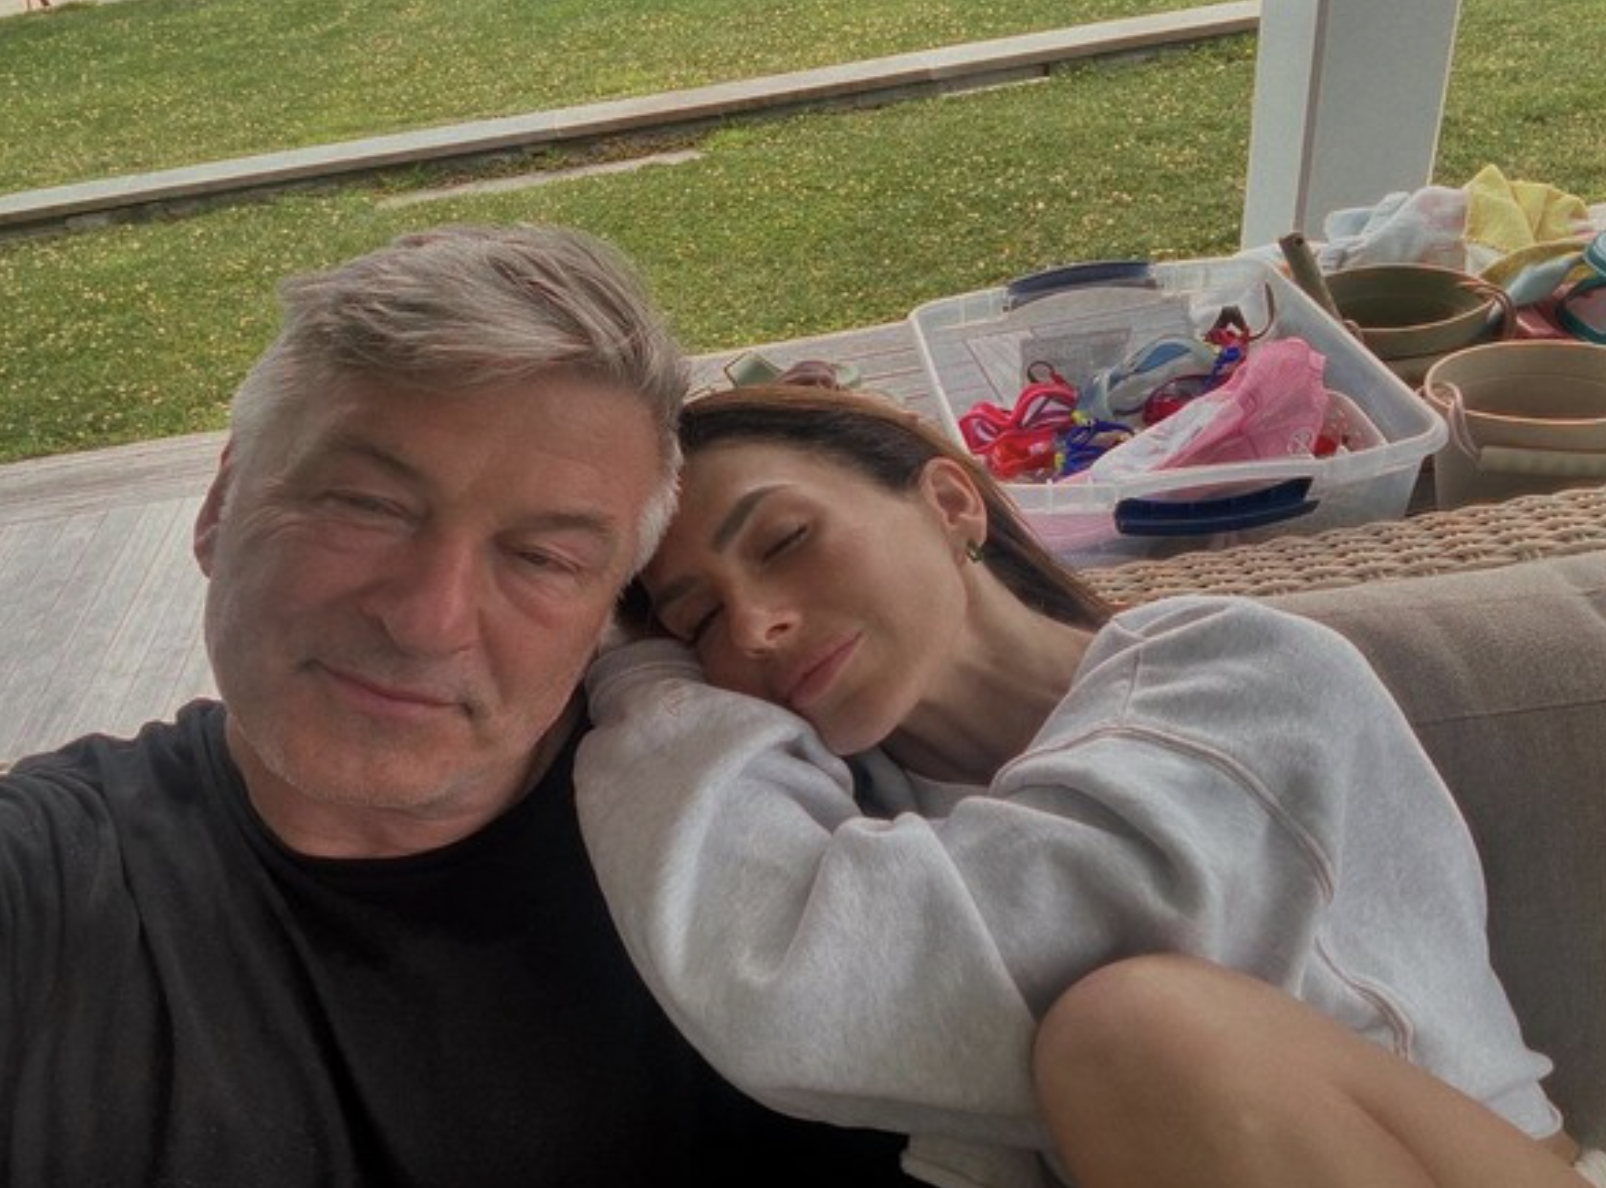 hilaria-baldwin-believes-alec-will-be-found-not-guilty-after-quotstressfulquot-trial